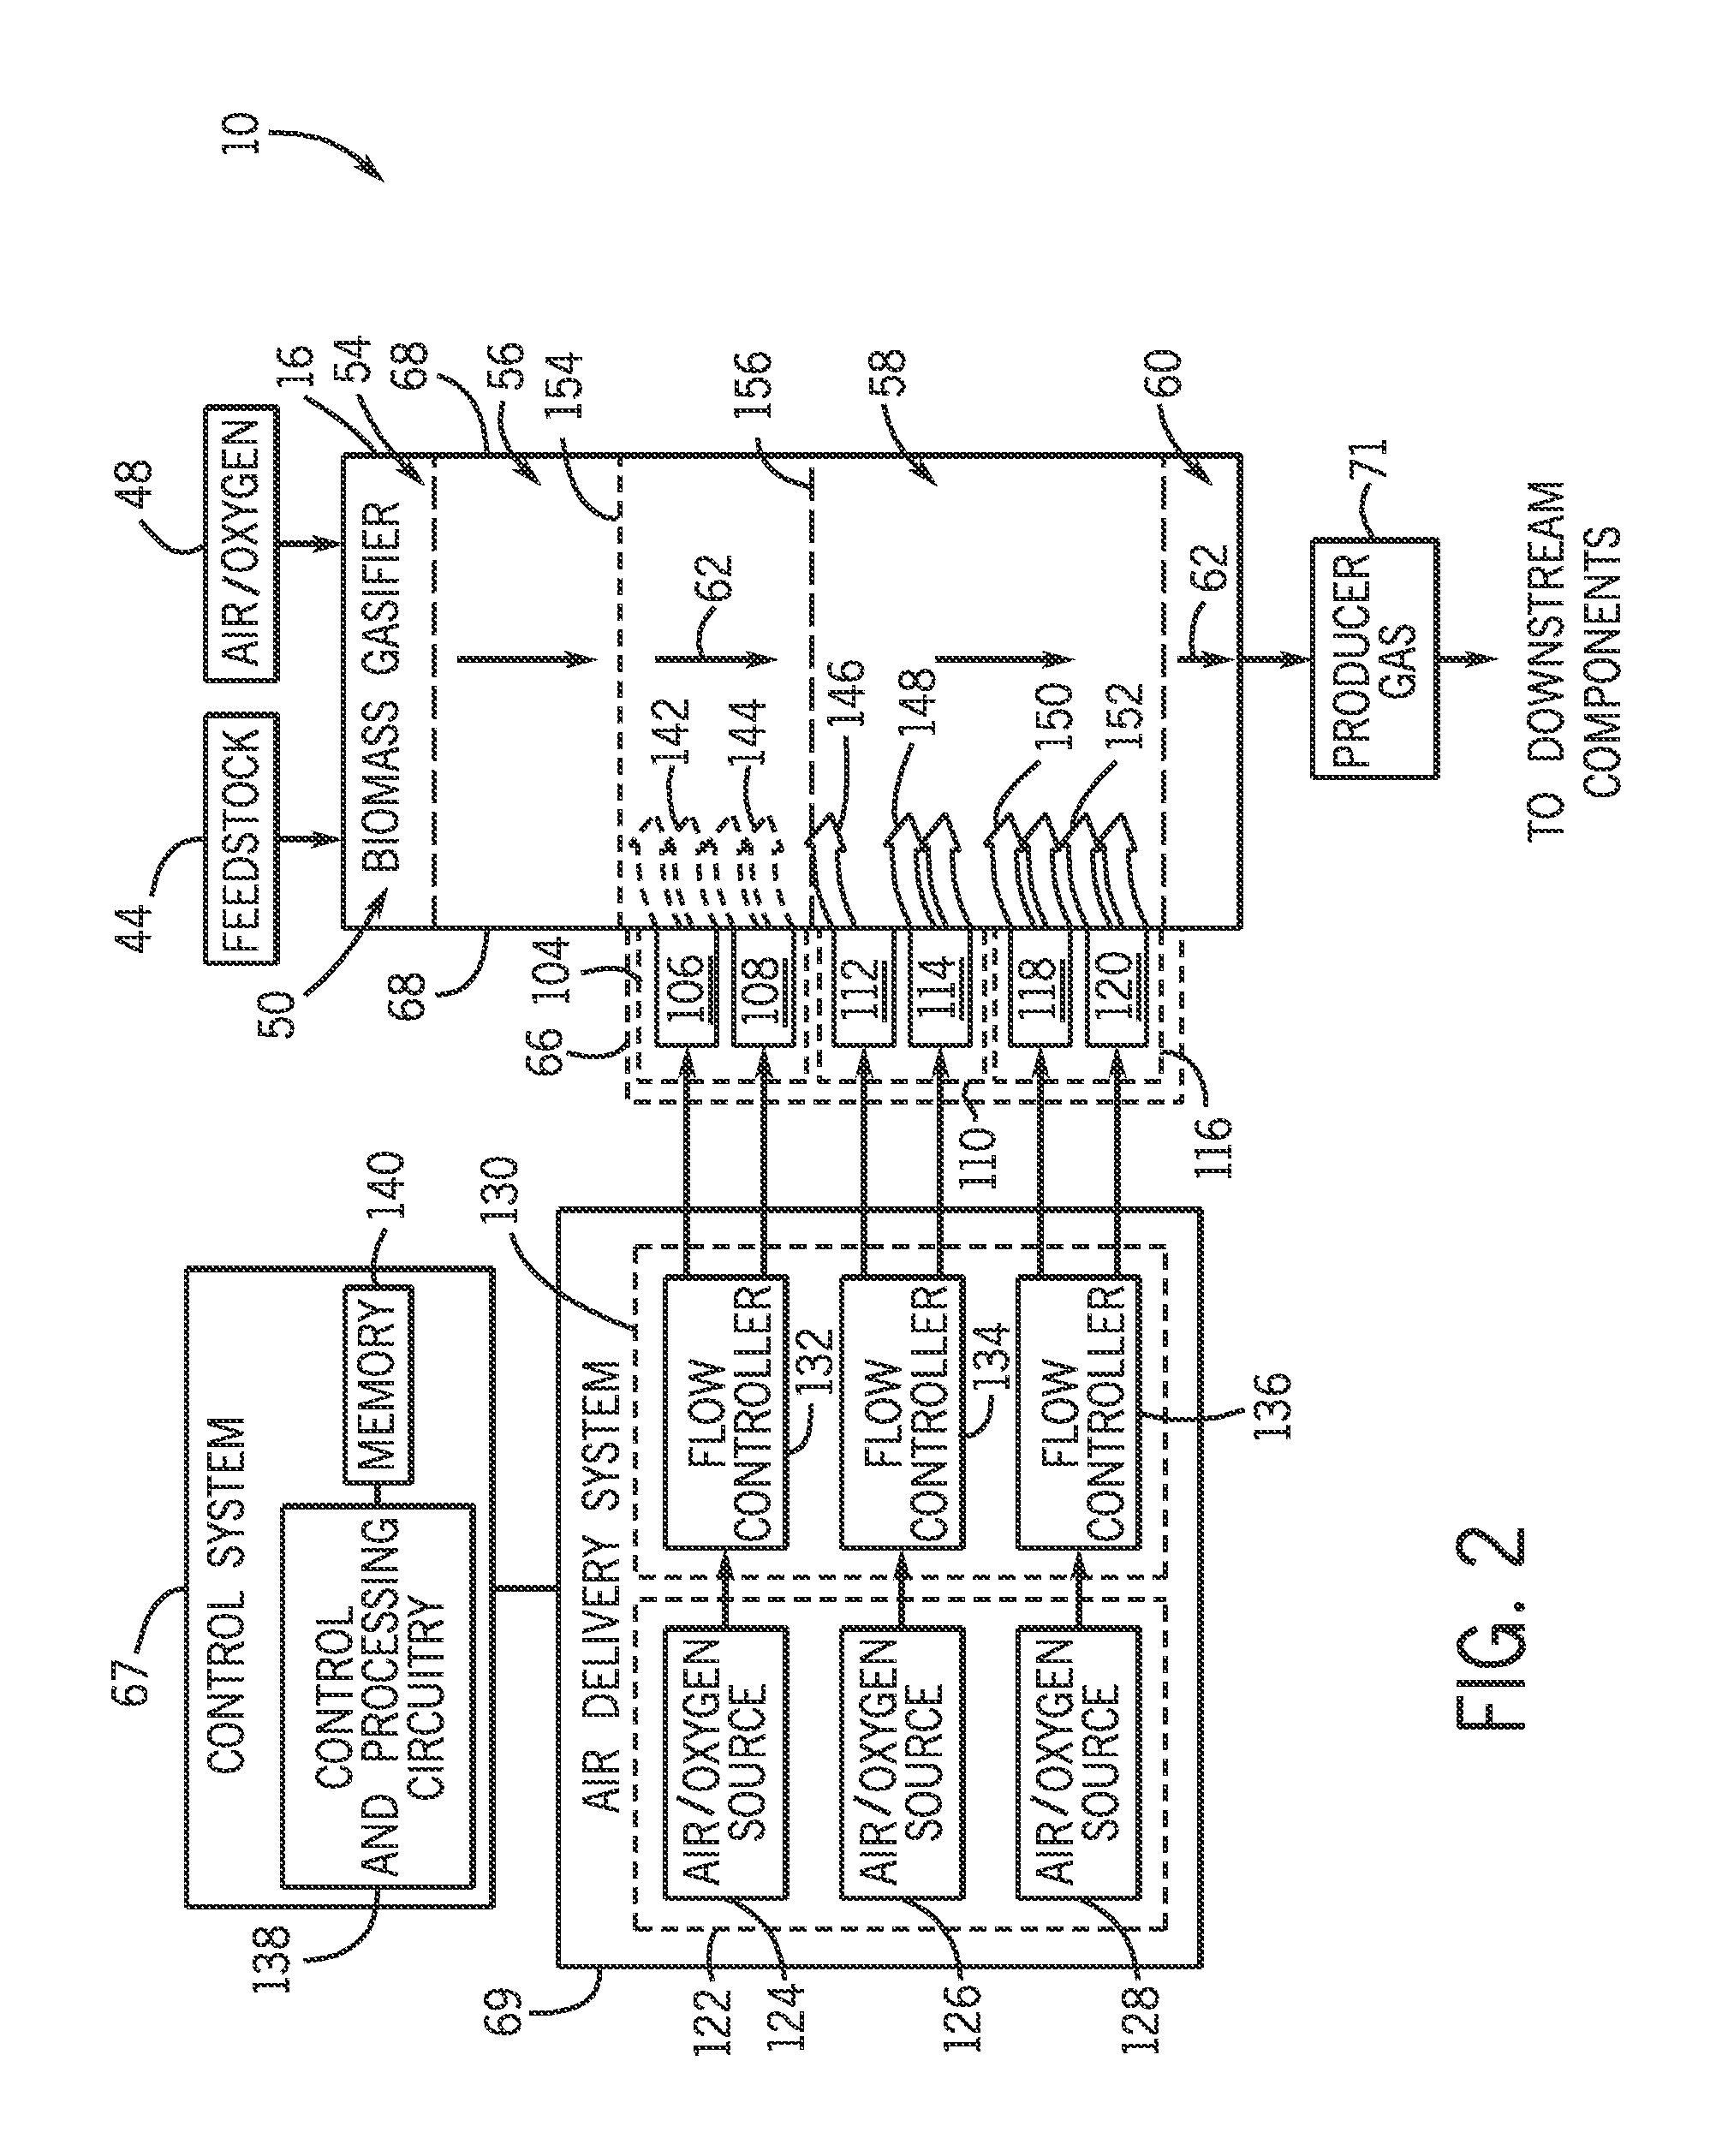 Biomass gasification systems having controllable fluid injectors